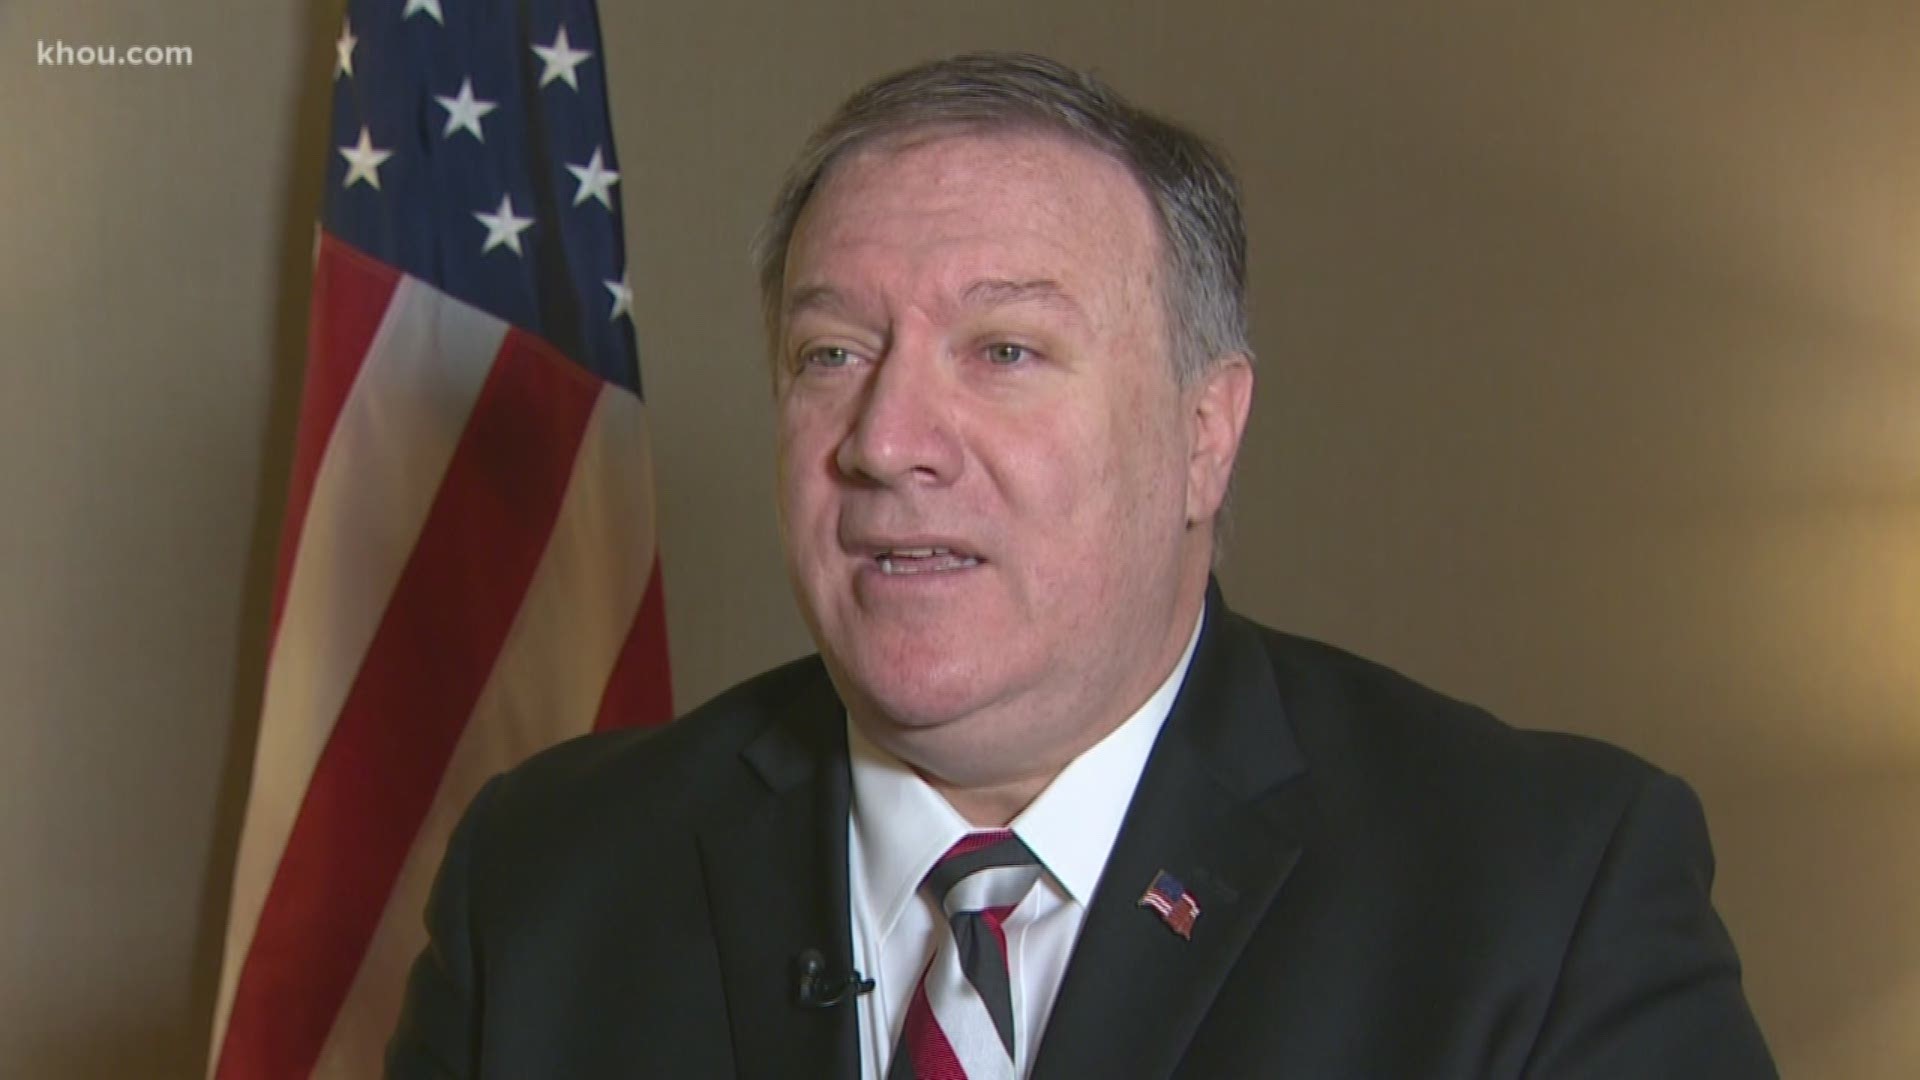 KHOU 11 News sat down with Mike Pompeo on Tuesday to talk about some of the biggest global concerns as well as other domestic issues.